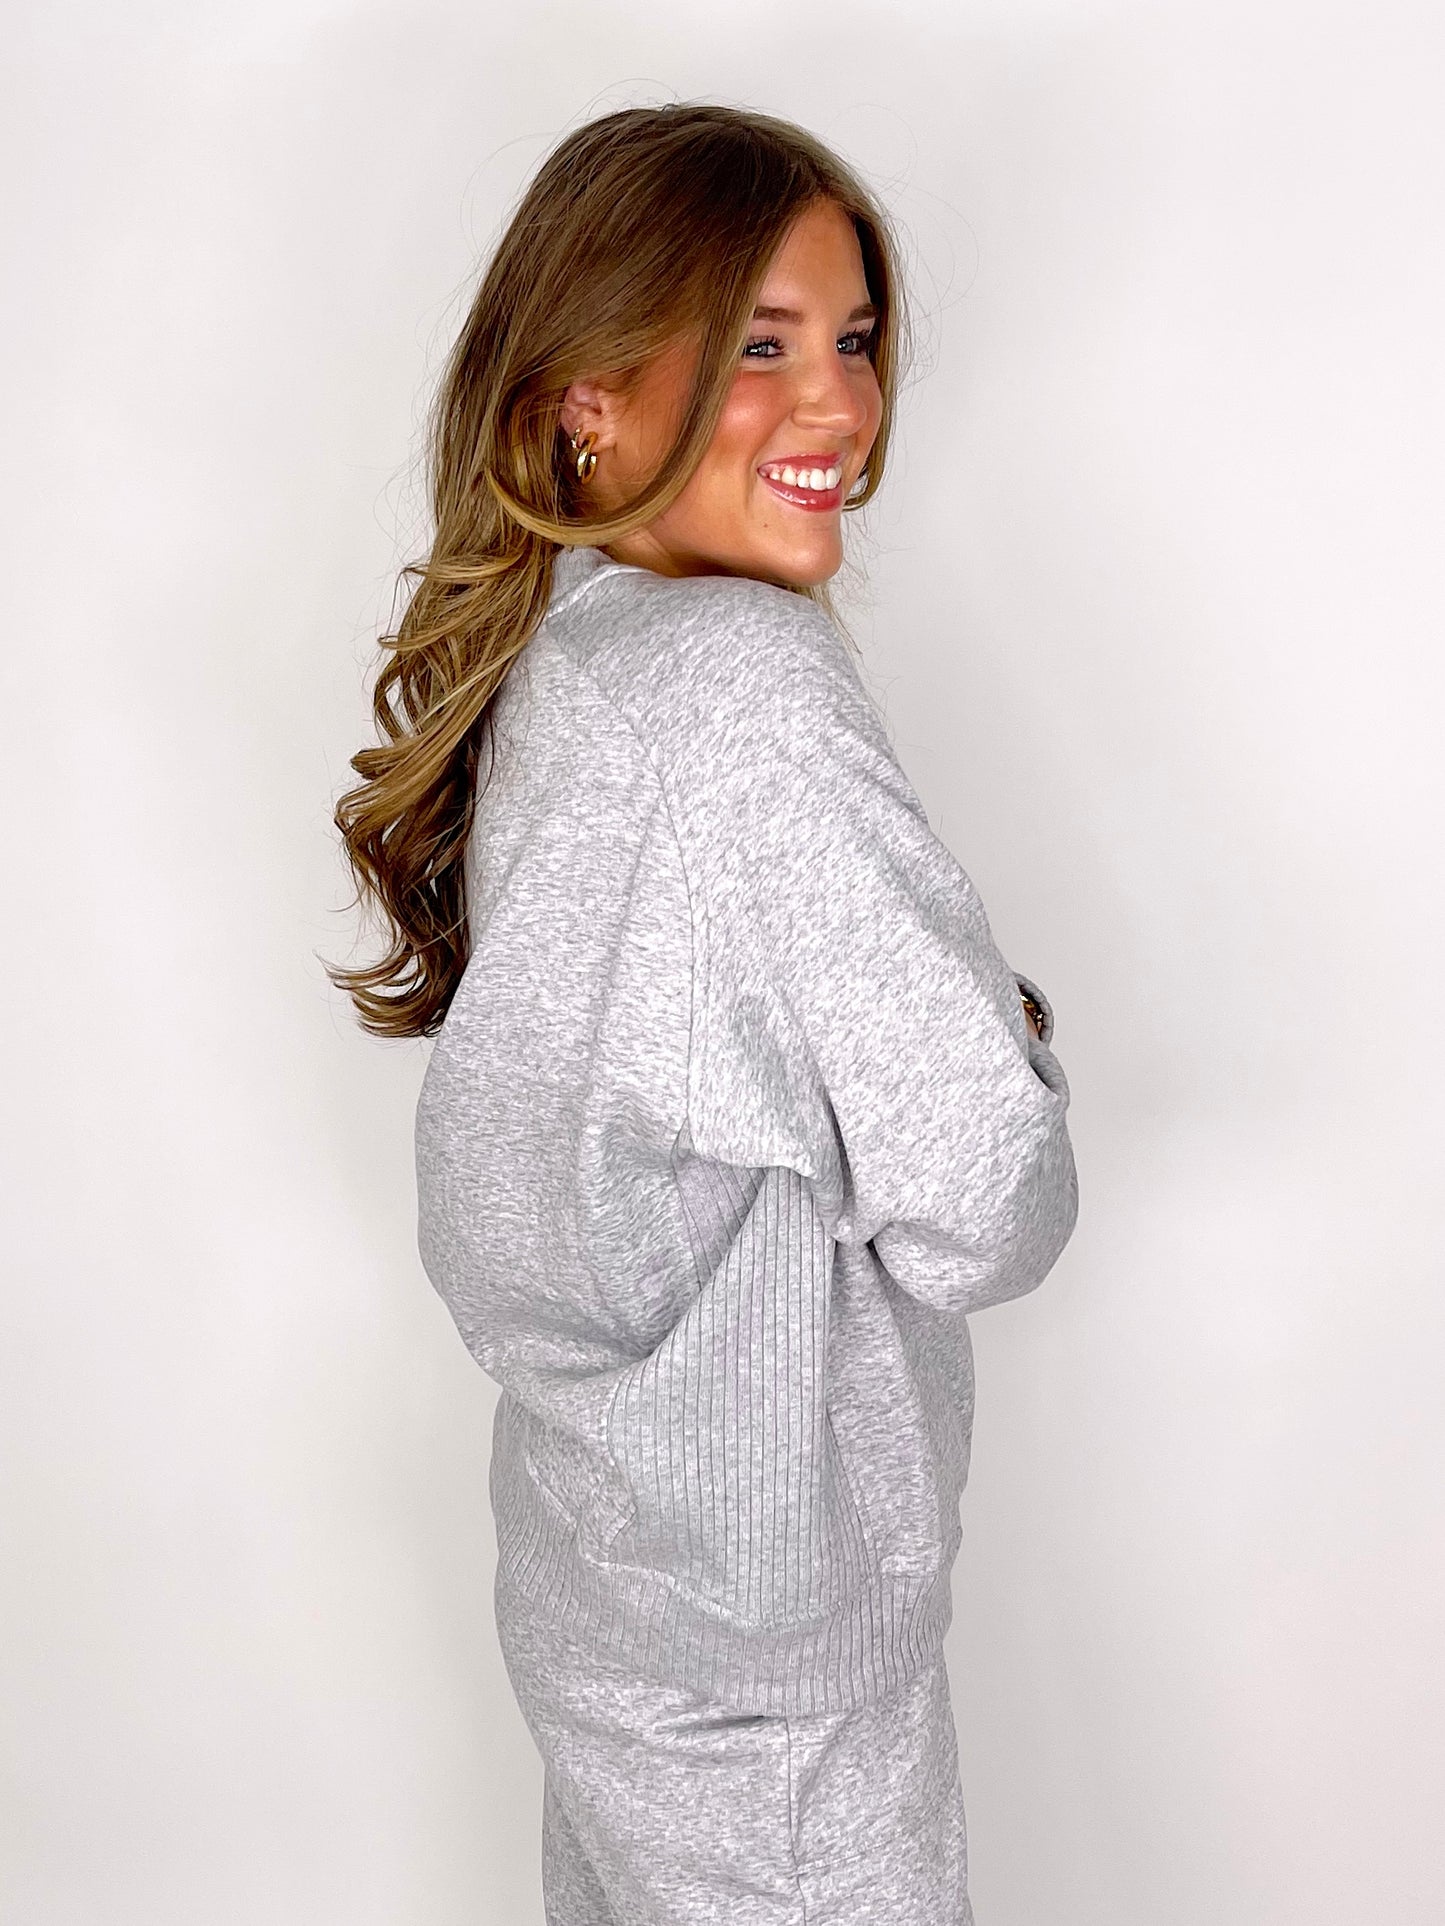 The Tate Sweatshirt-Sweatshirt-Rae Mode-The Village Shoppe, Women’s Fashion Boutique, Shop Online and In Store - Located in Muscle Shoals, AL.